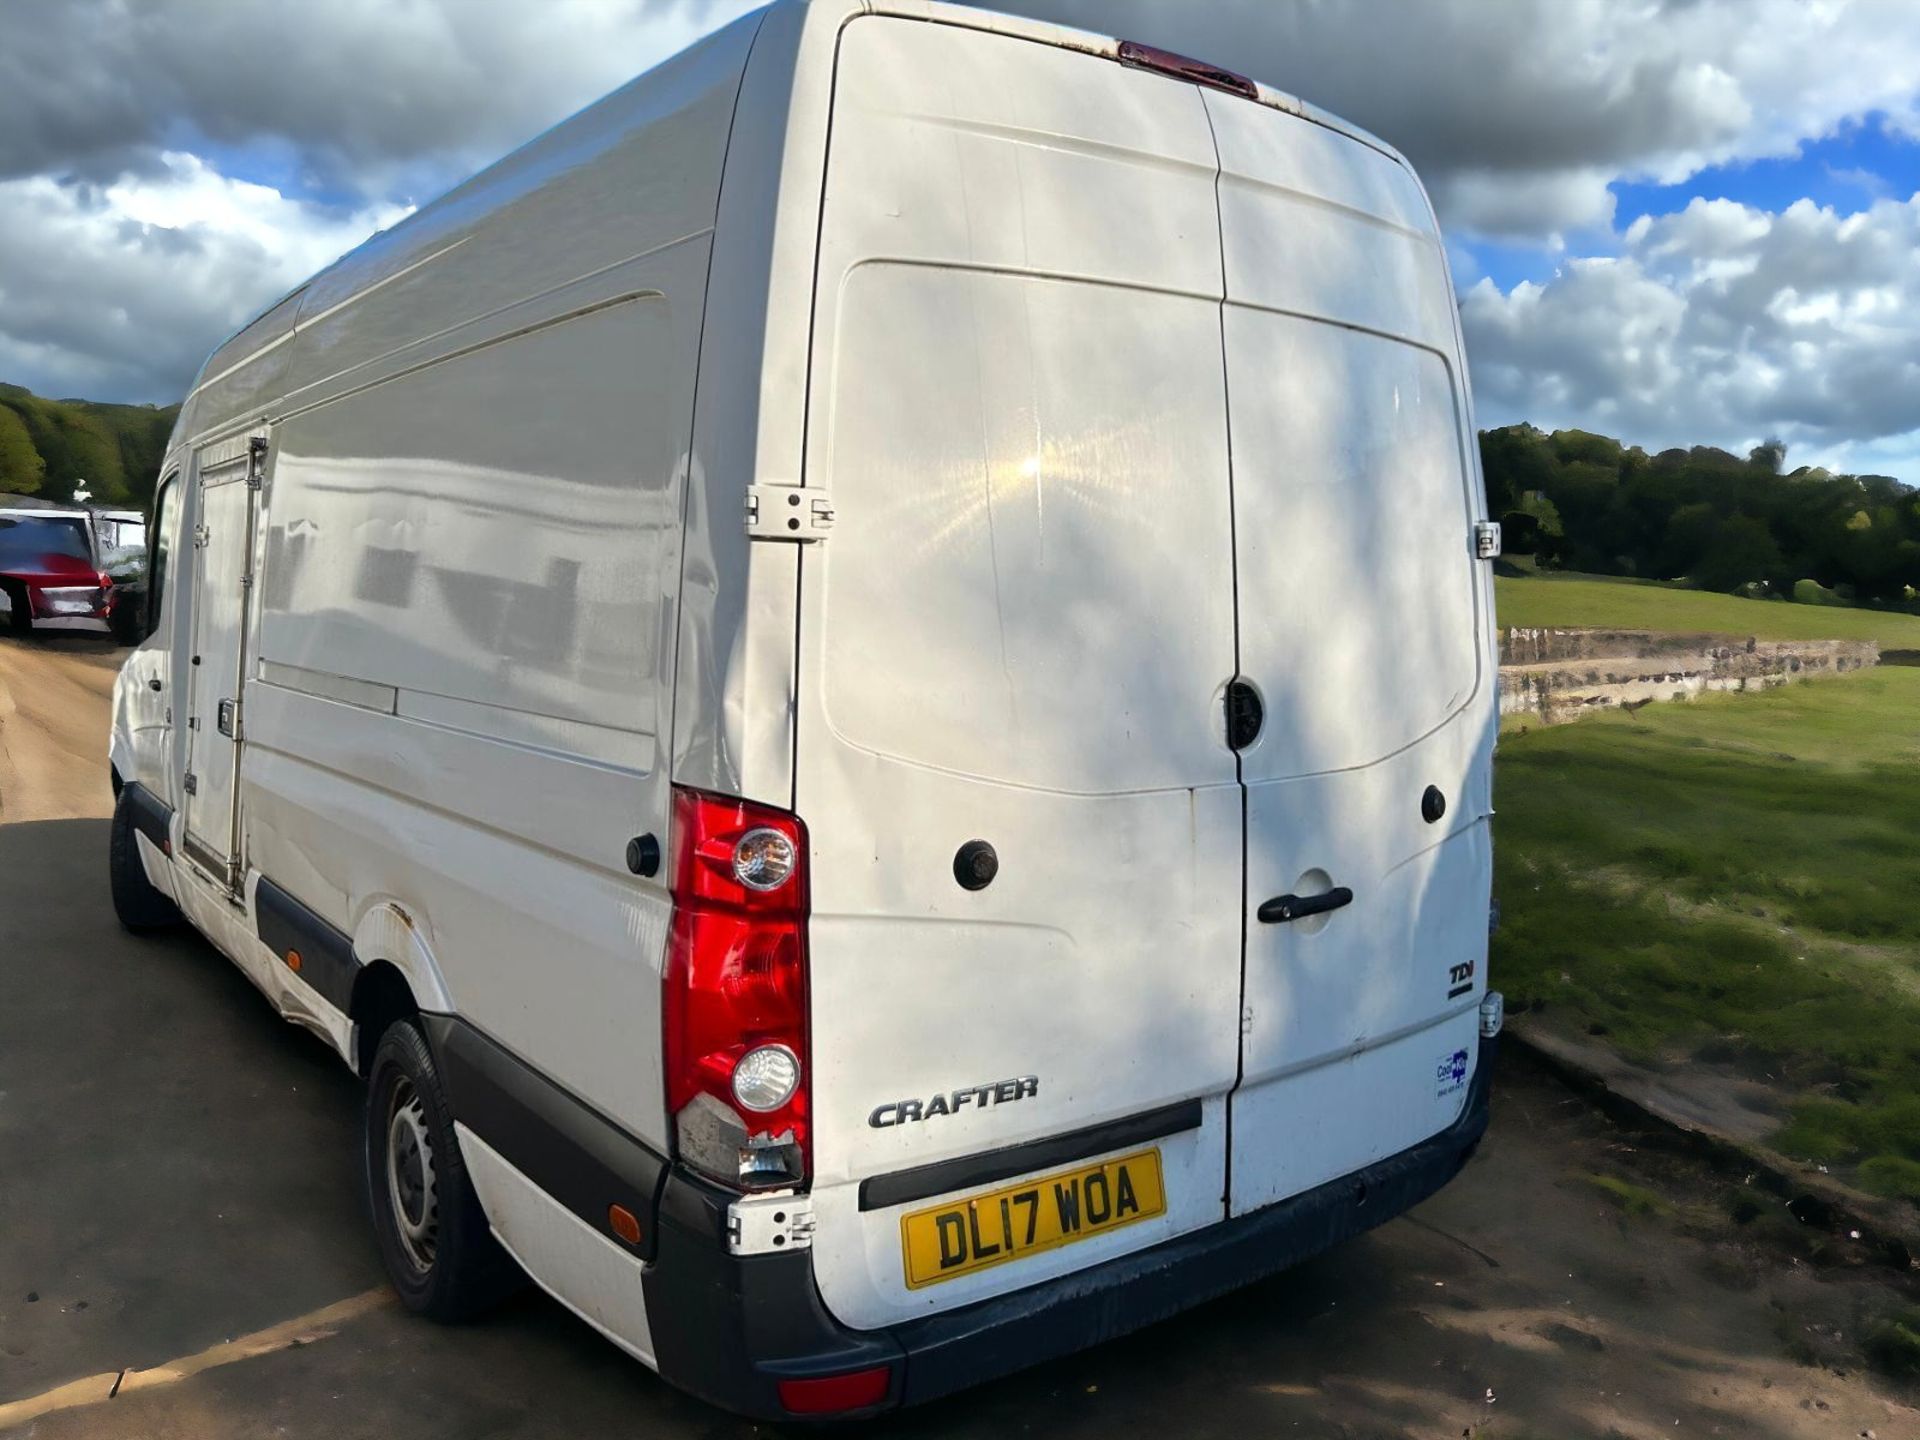 2017 VOLKSWAGEN CRAFTER CR35 TDI DIESEL VAN - NON-RUNNER, ULEZ FREE - HPI CLEAR - READY TO GO! - Image 3 of 6